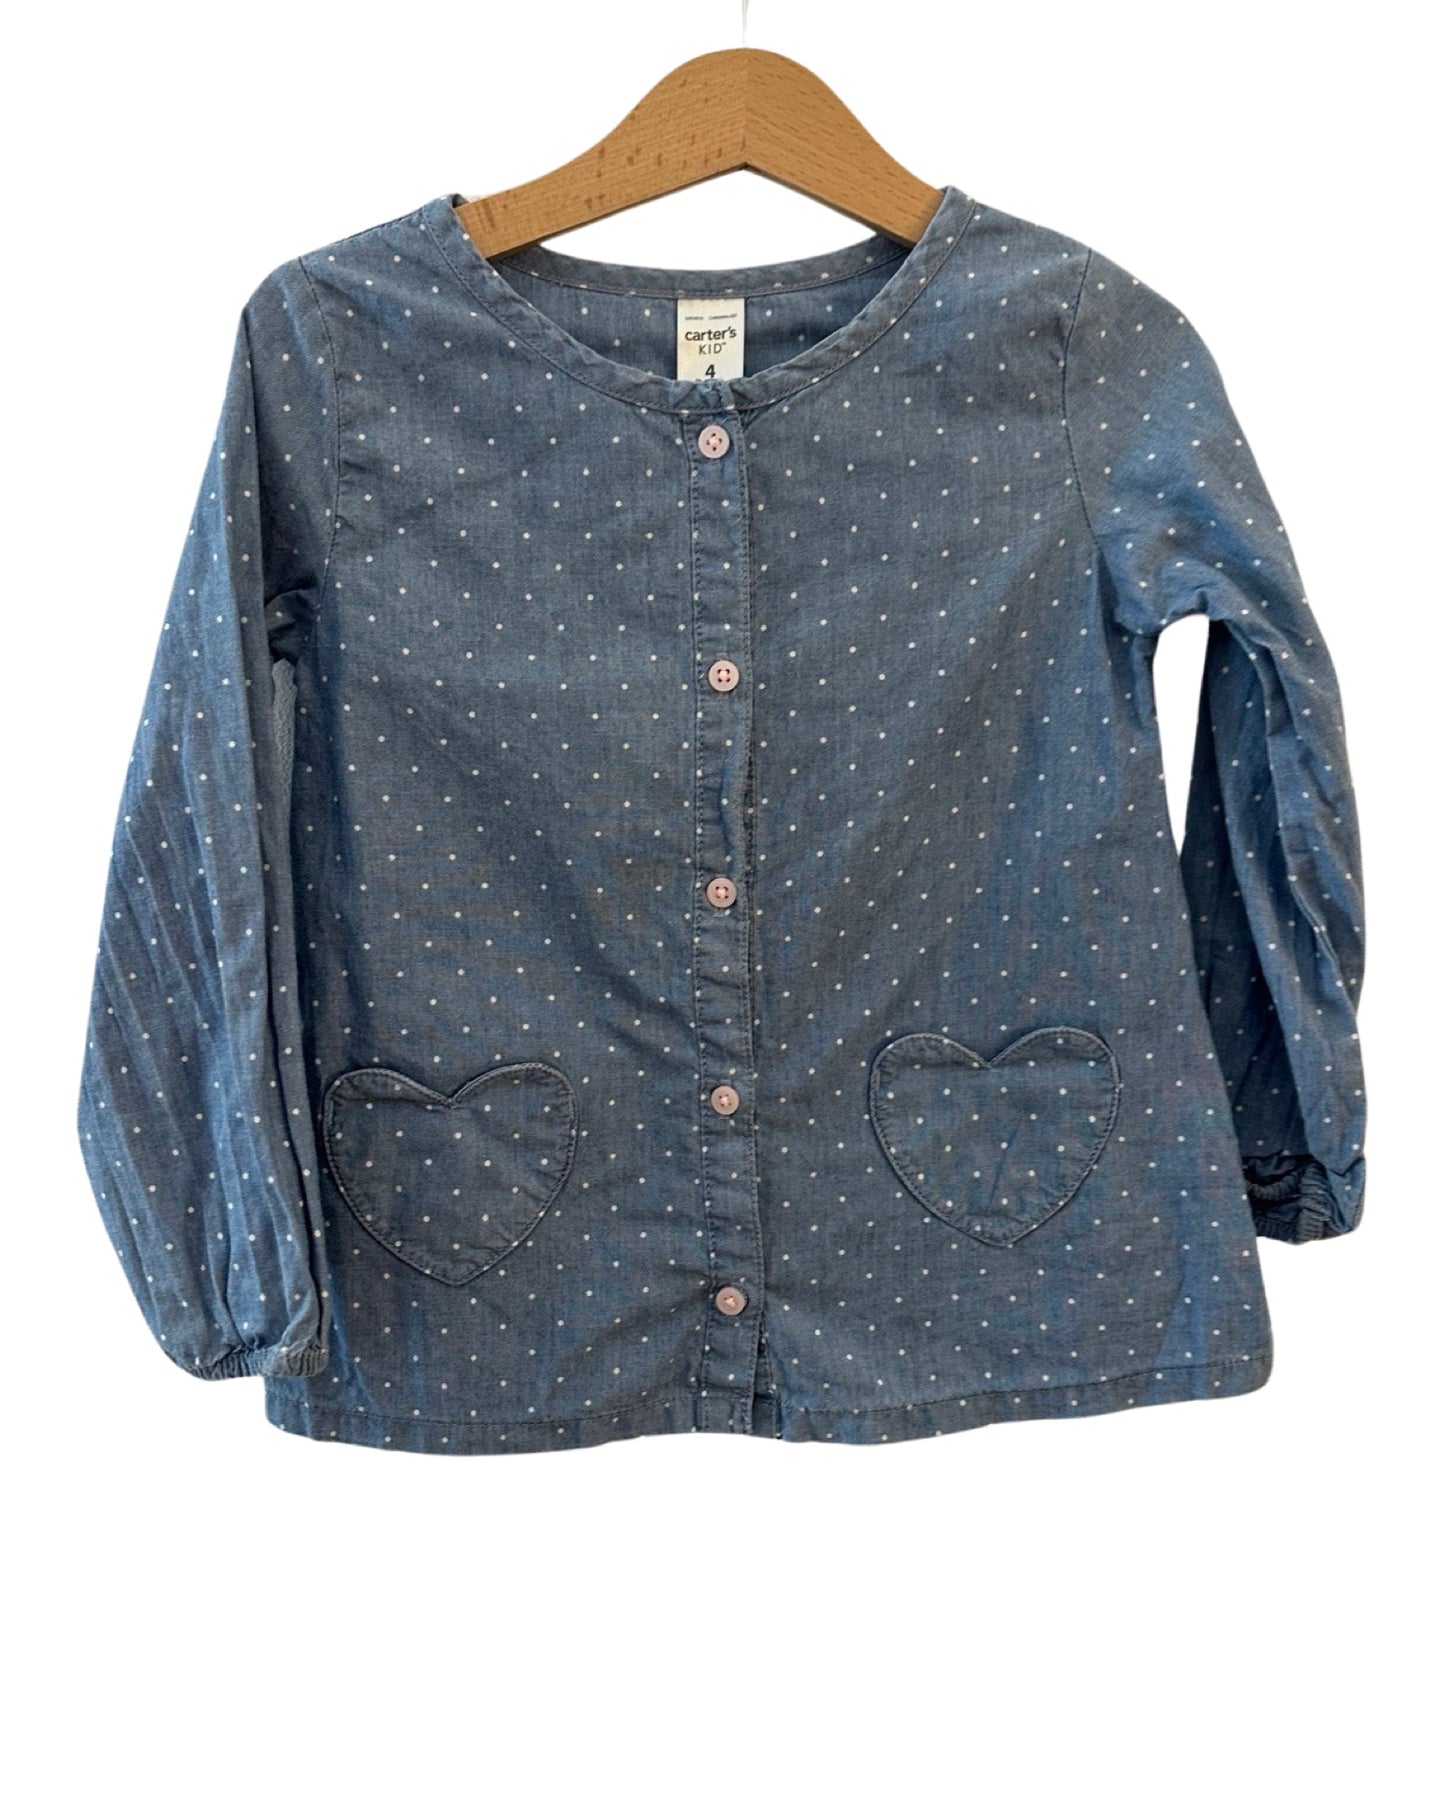 Carters cotton blouse (3-4yrs)